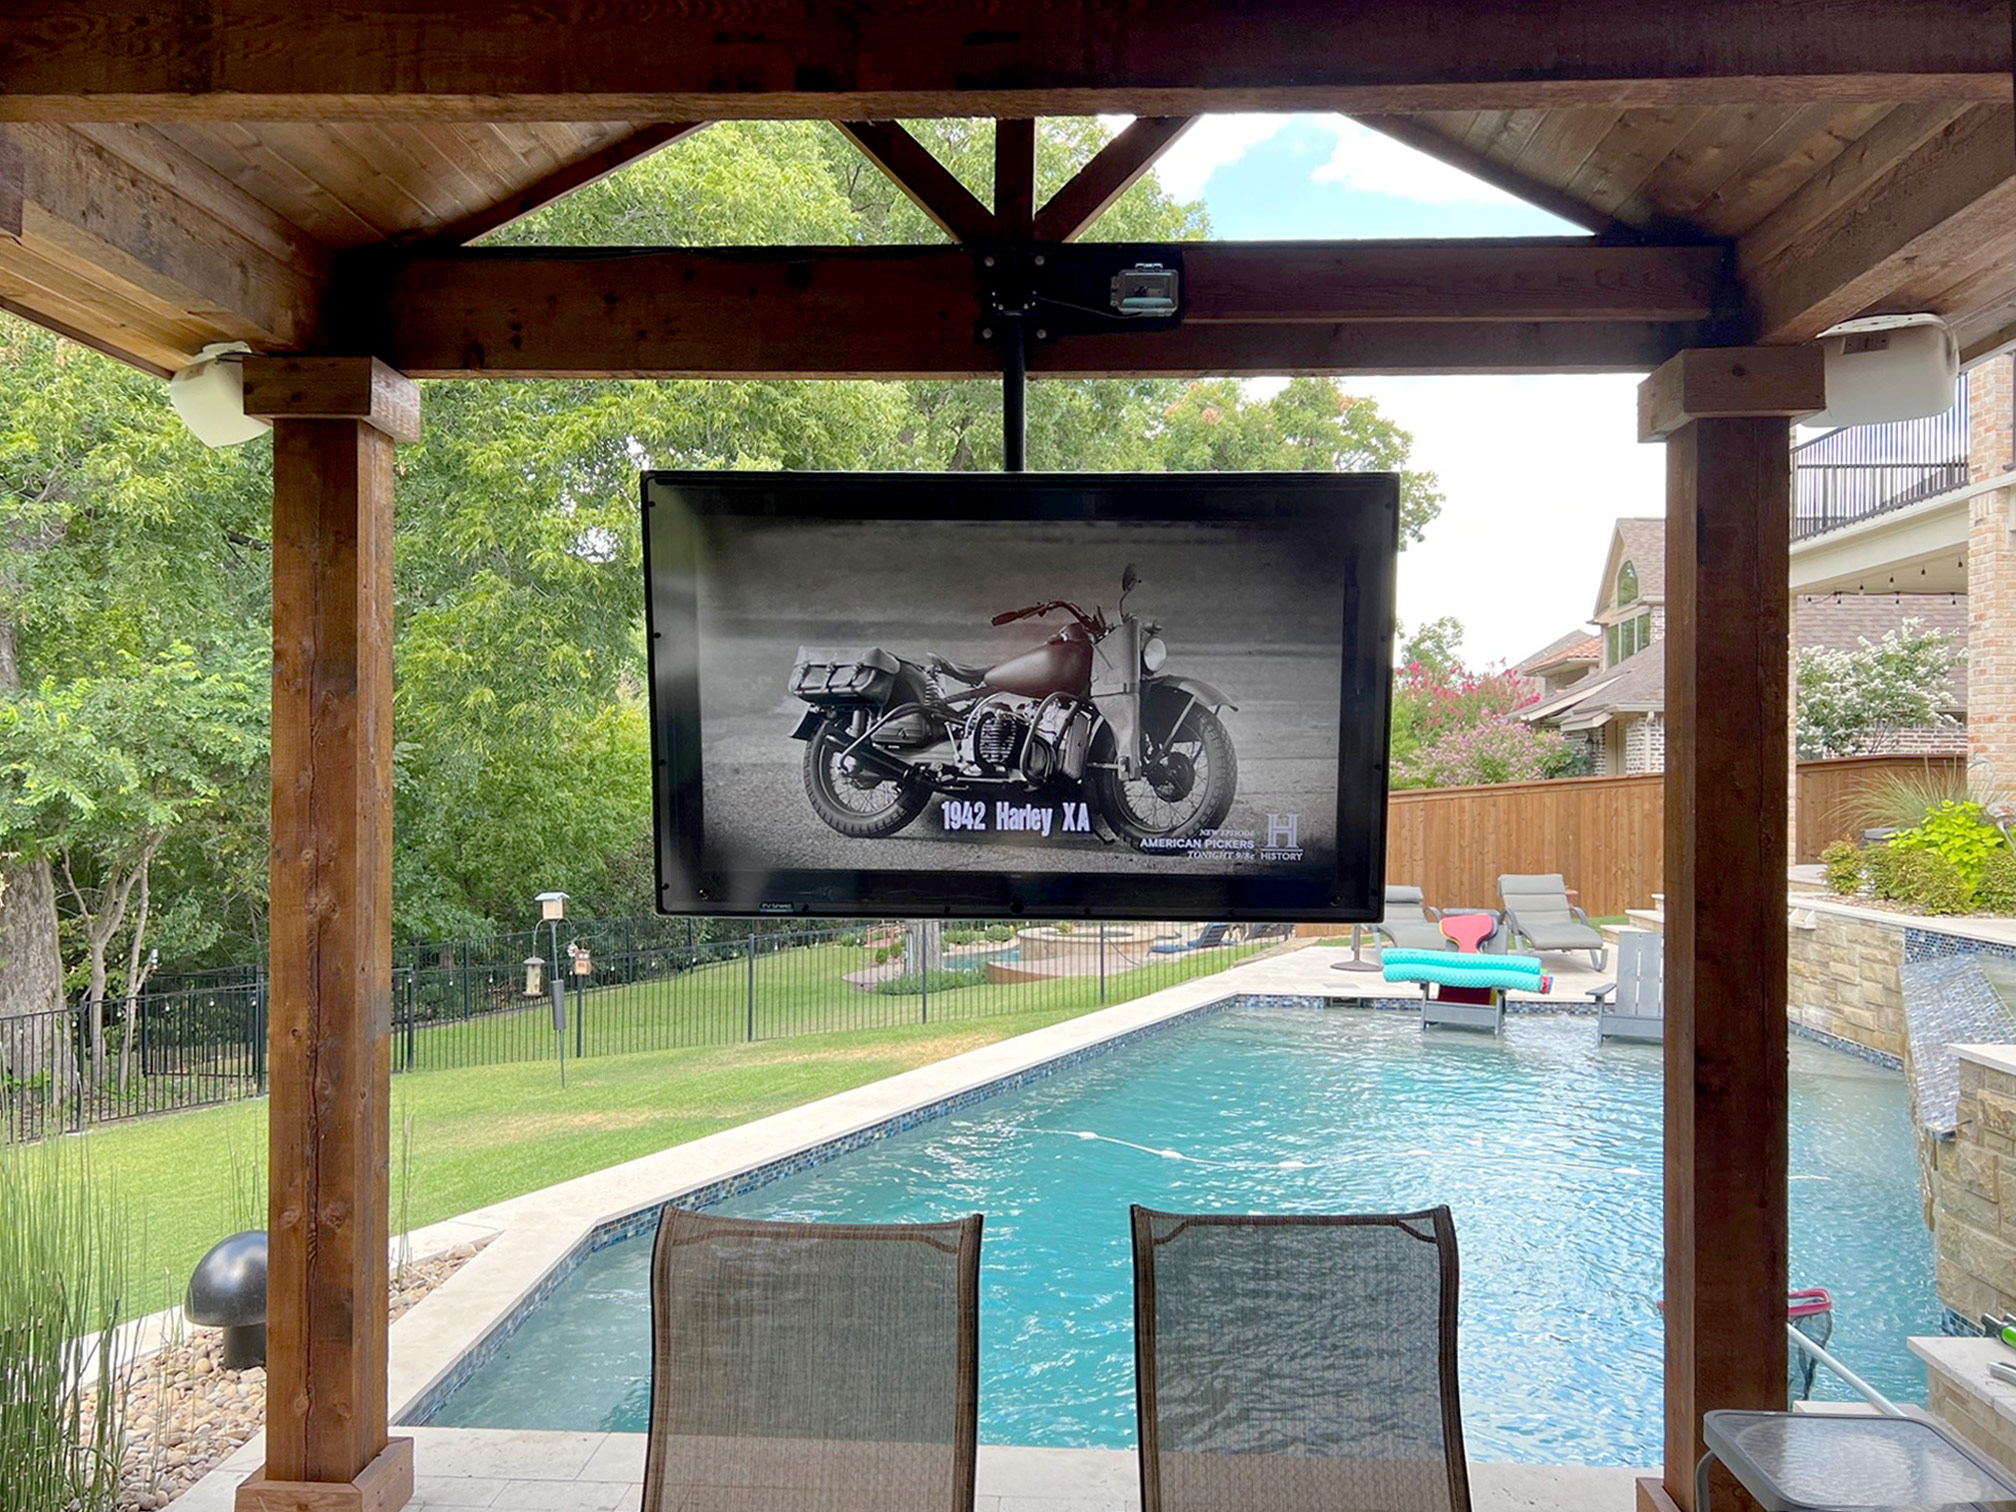 The TV Shield outdoor TV cabinet by a pool